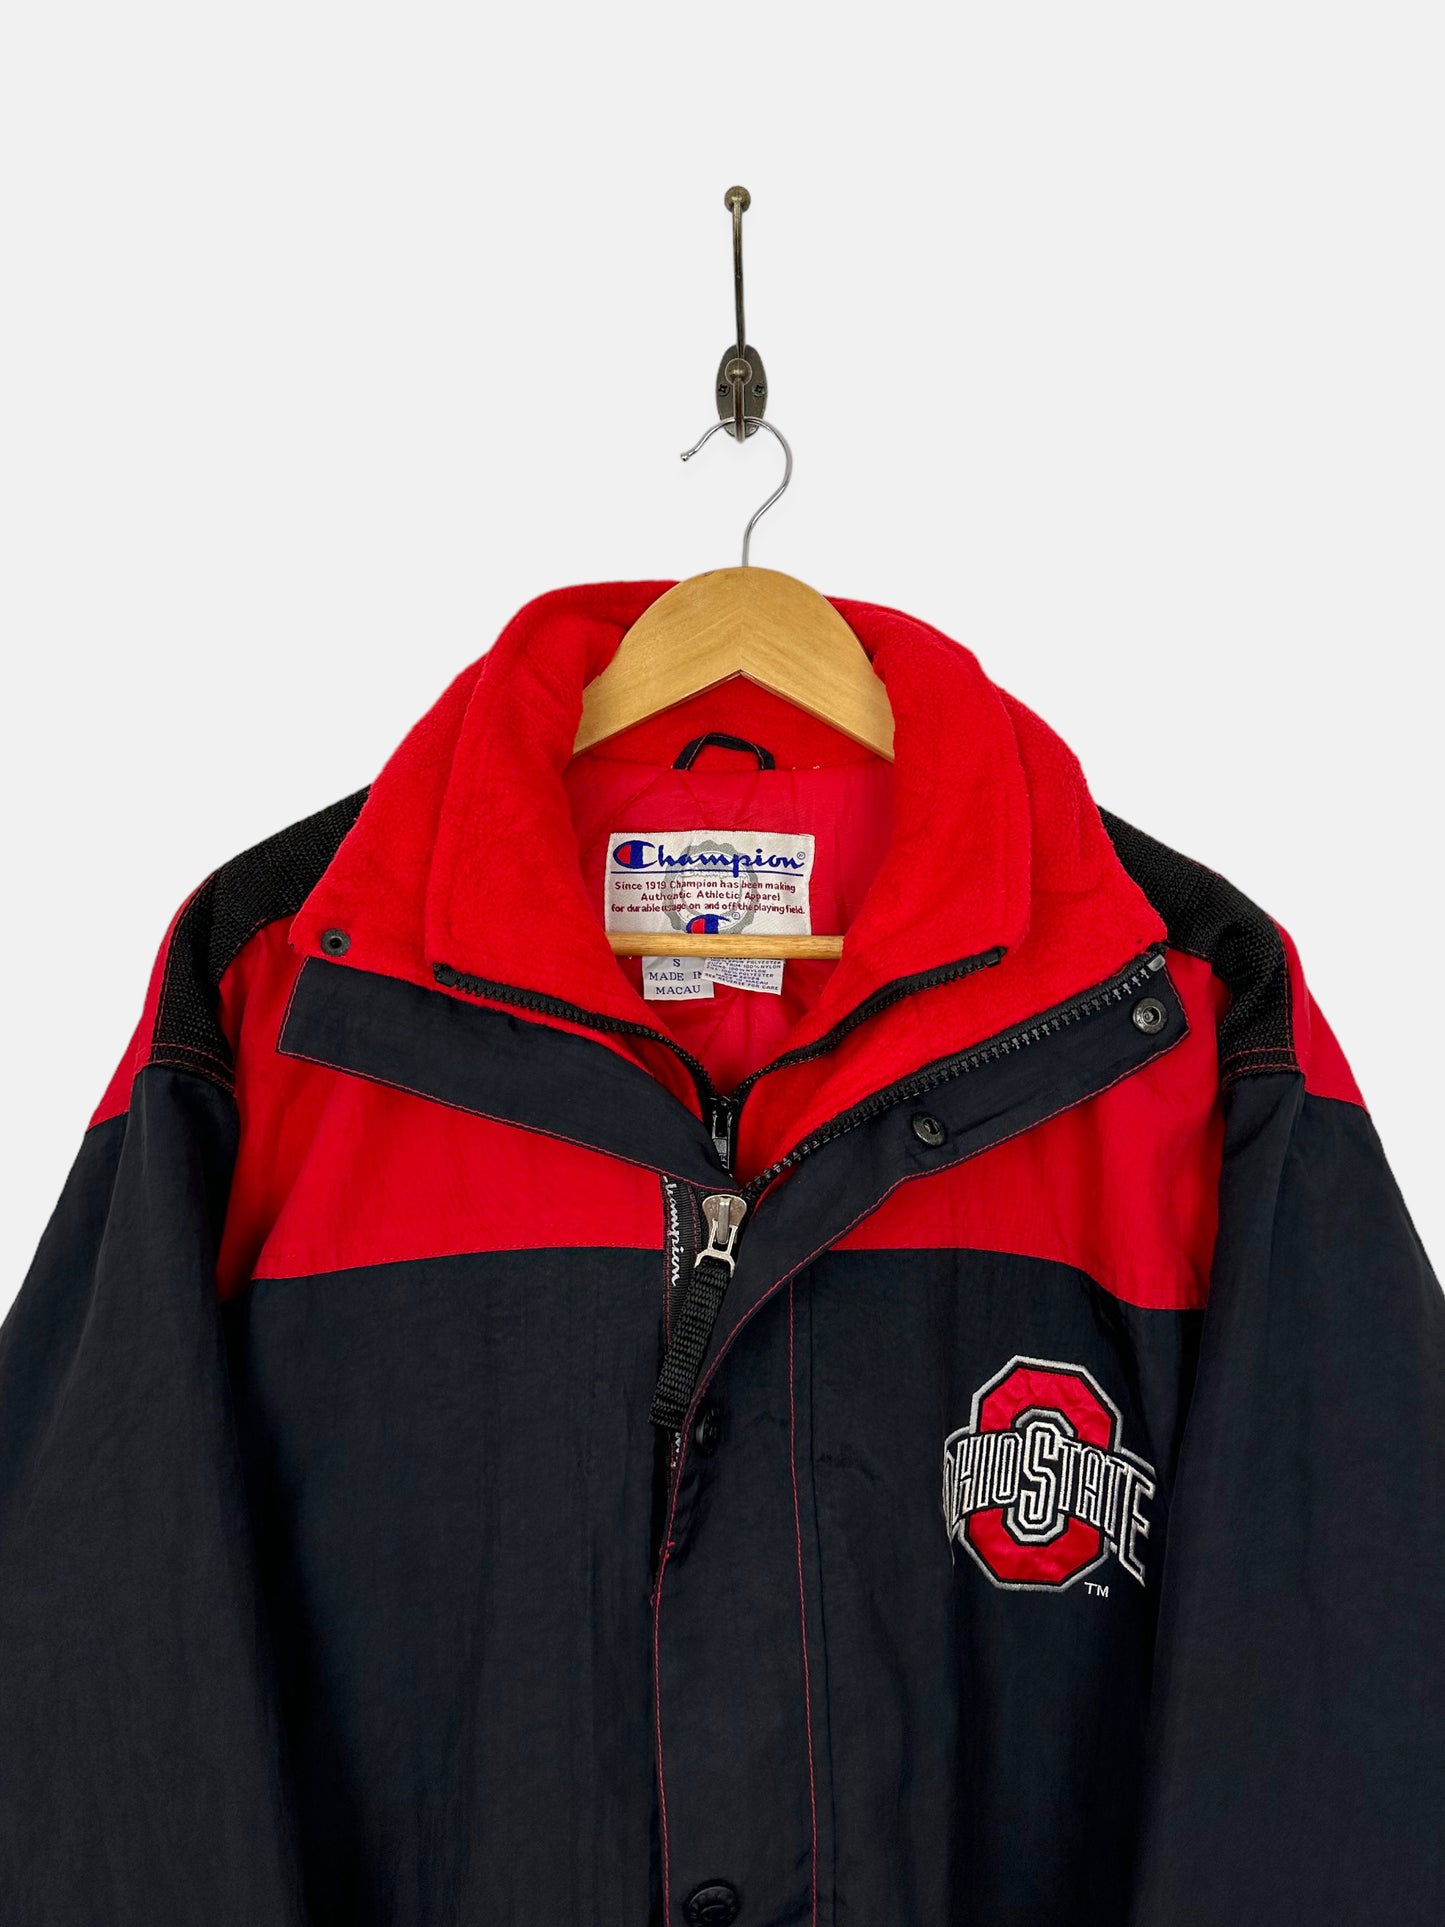 90's Champion Ohio State Embroidered Vintage Puffer Jacket Size S-M